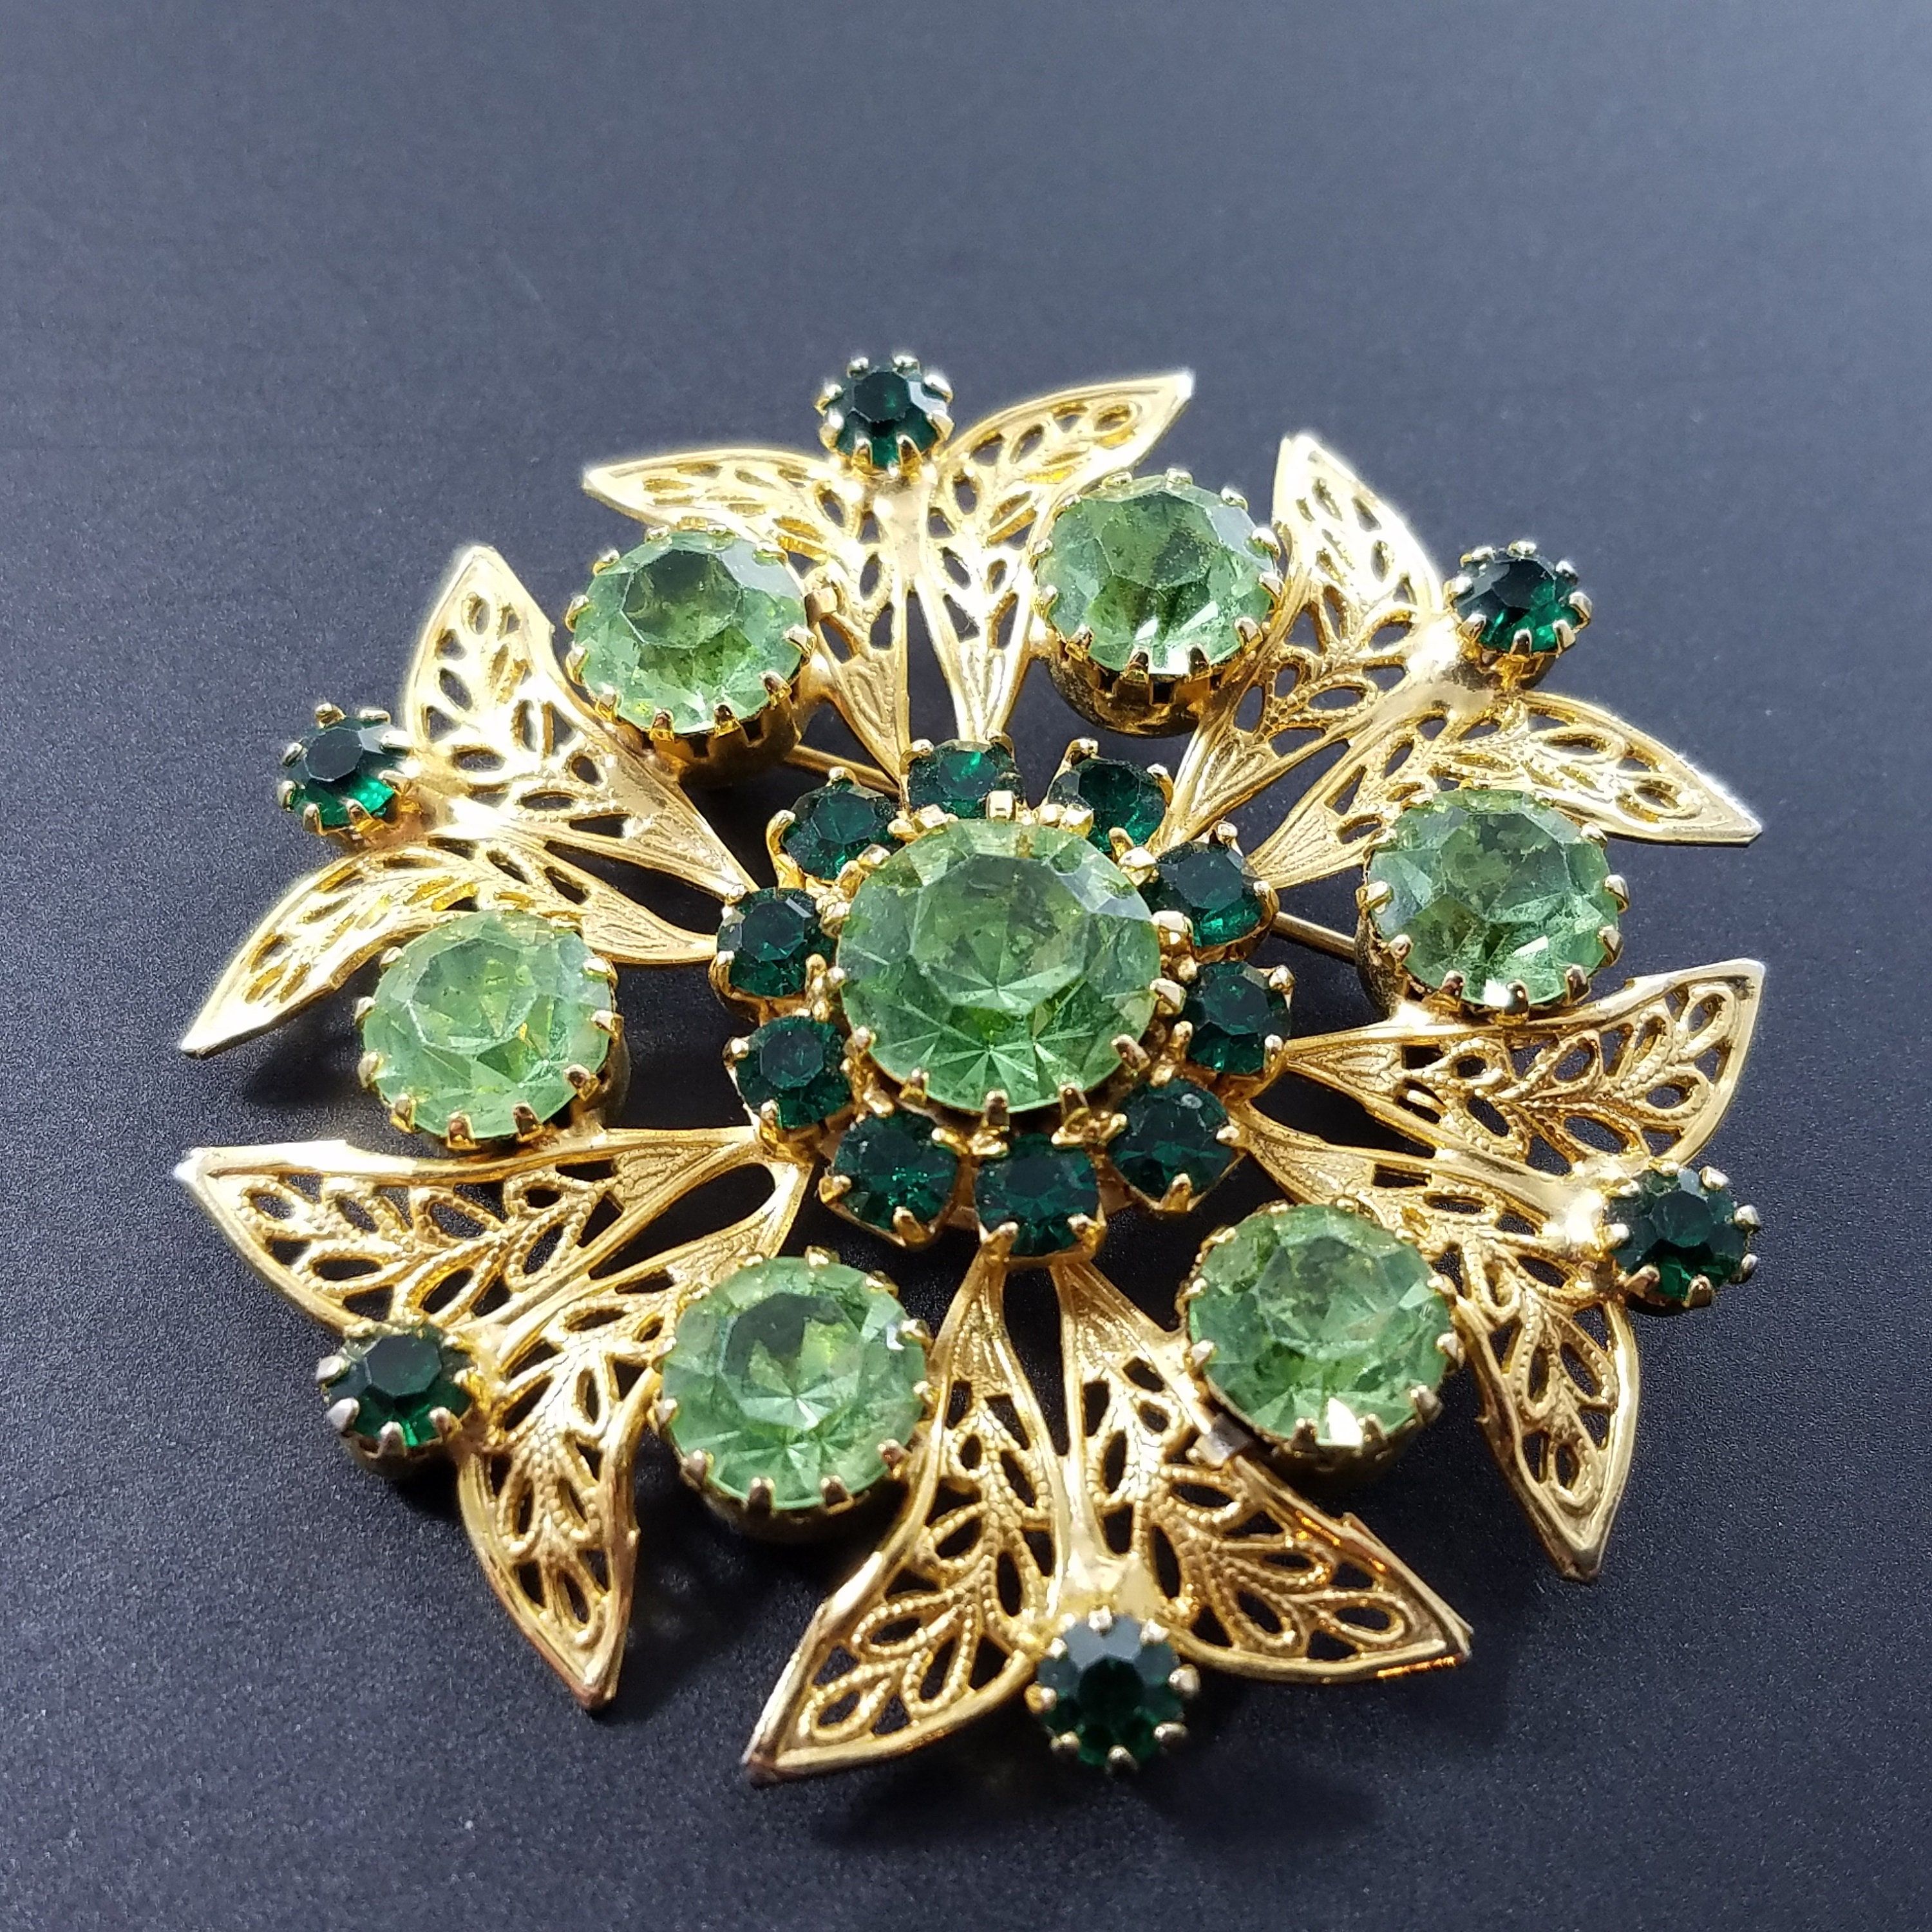 Fashionable Jewelry Retro Style Green Rhinestone Crystal Pearl Starfish Brooch  Pin Free shipping, TeresaCollections